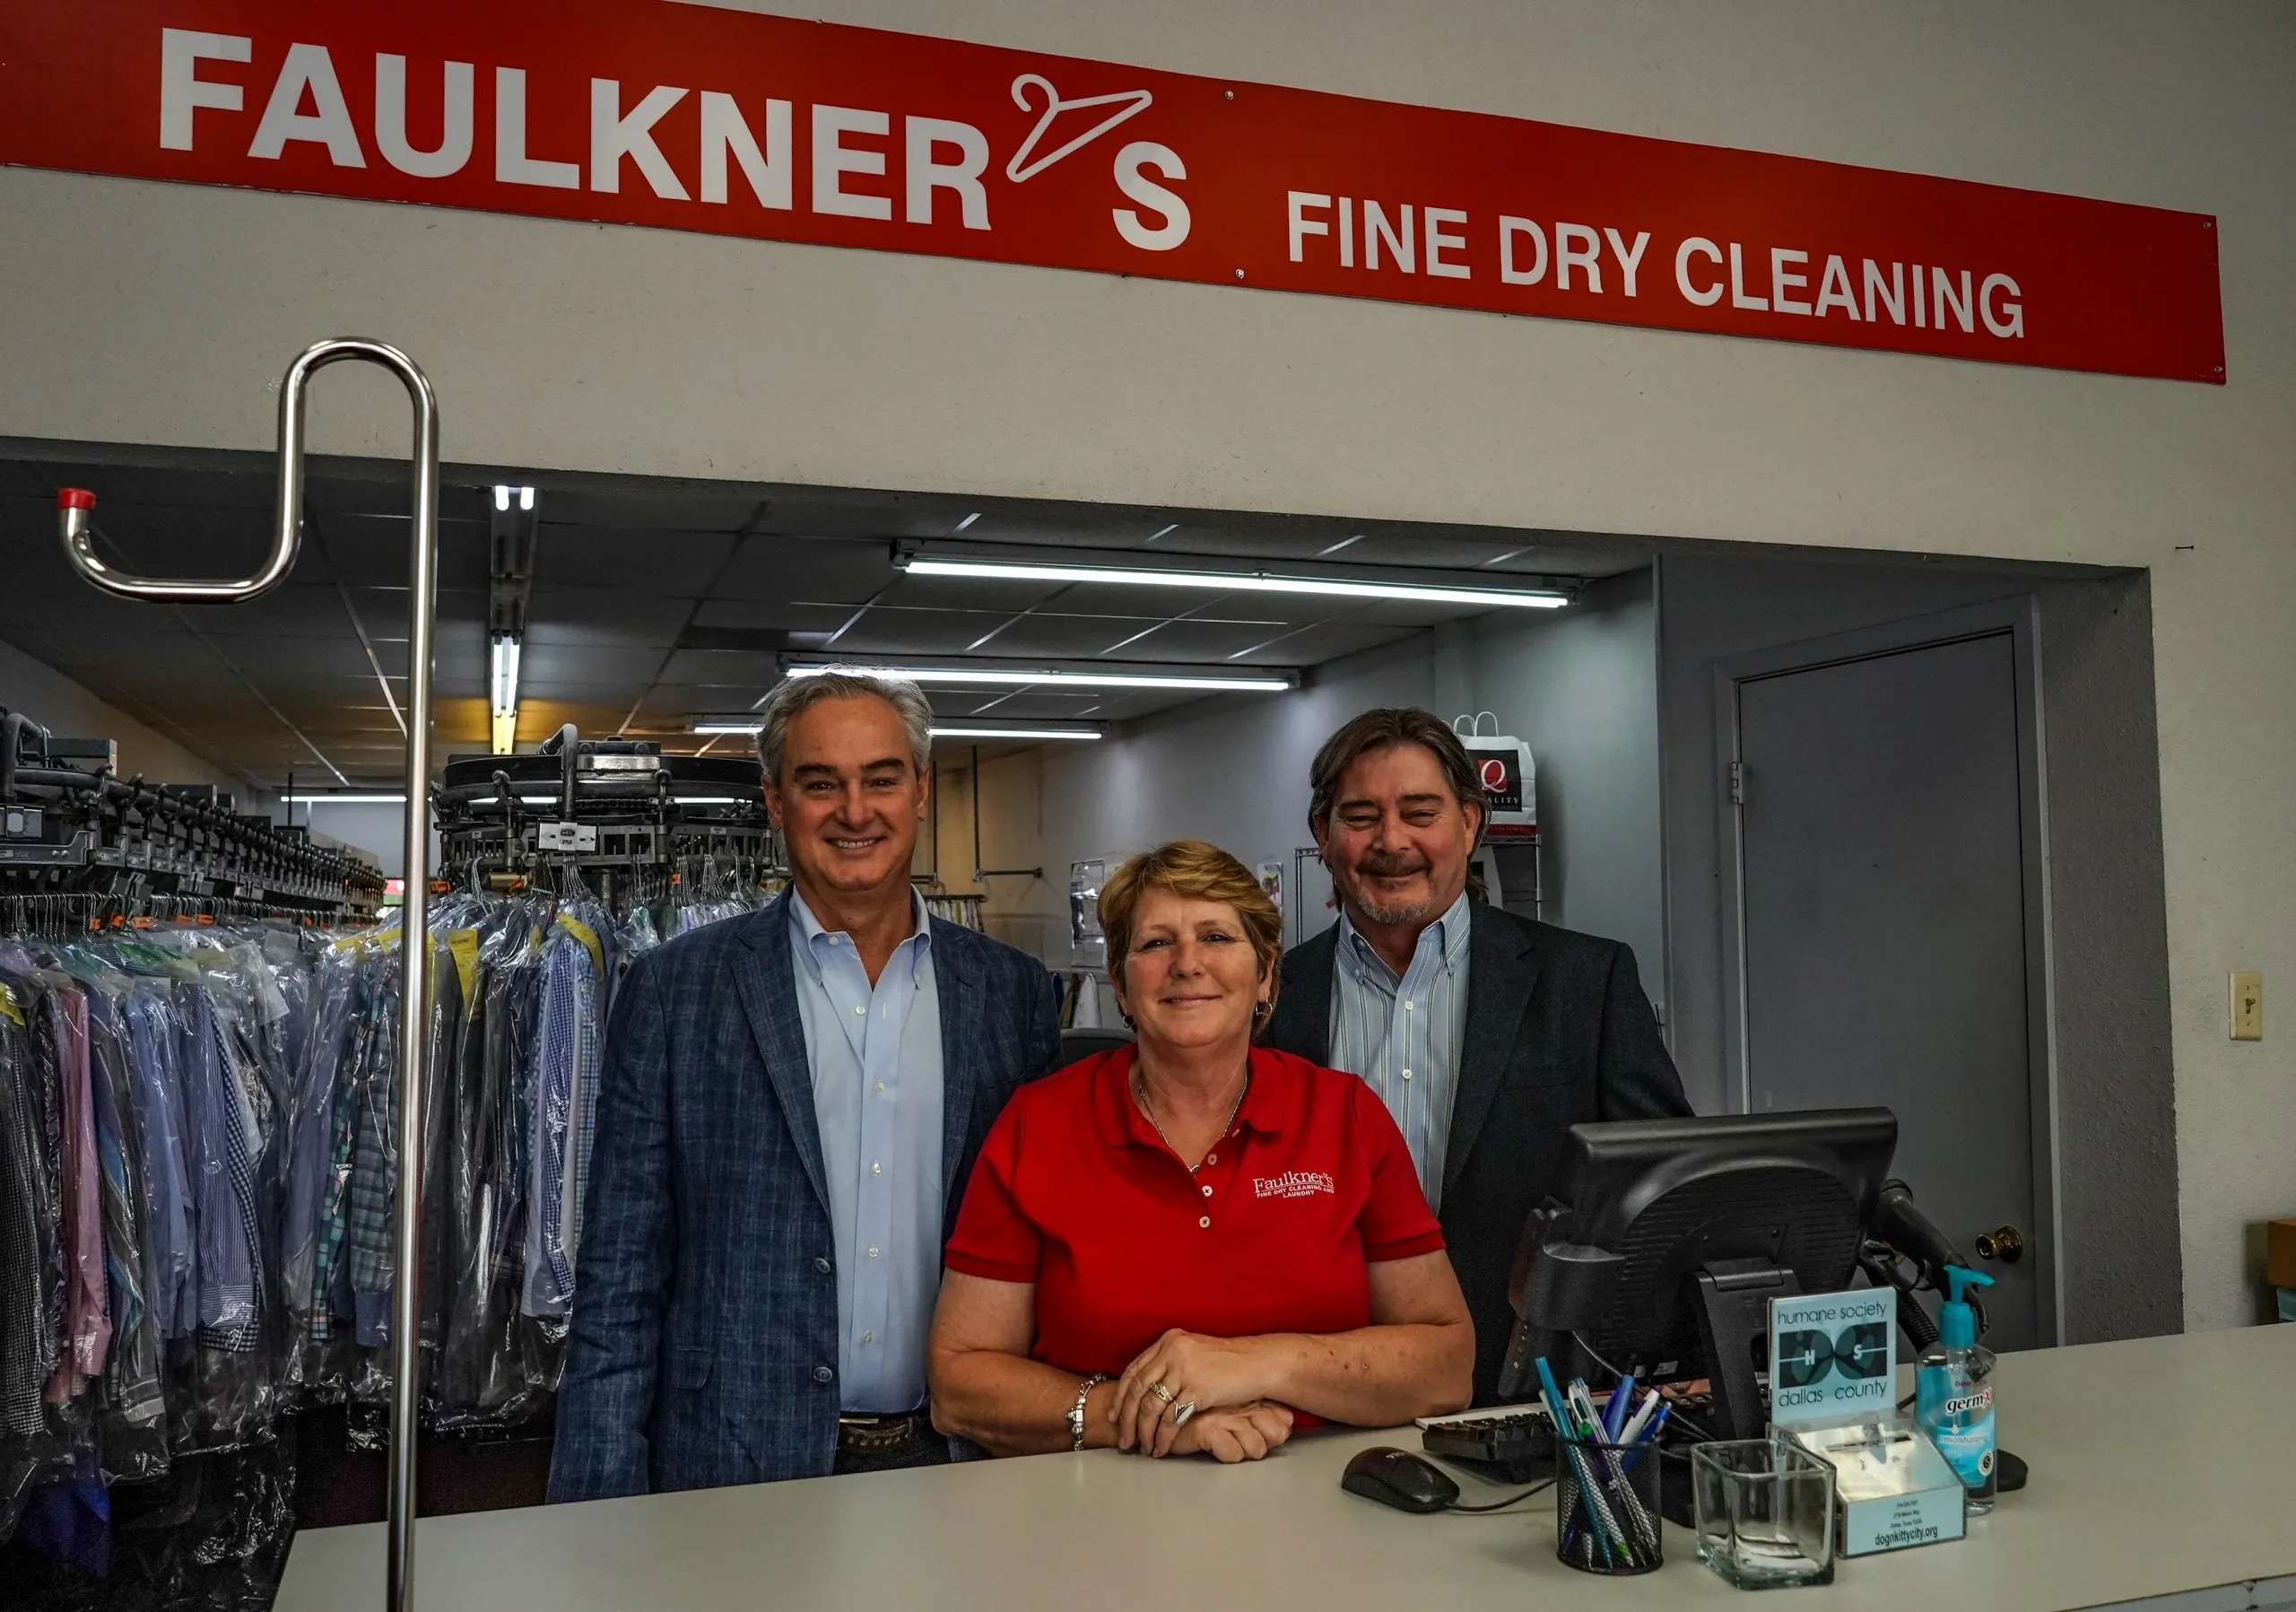 Three individuals standing behind a dry cleaning counter, with two men flanking a woman, all smiling for the camera.